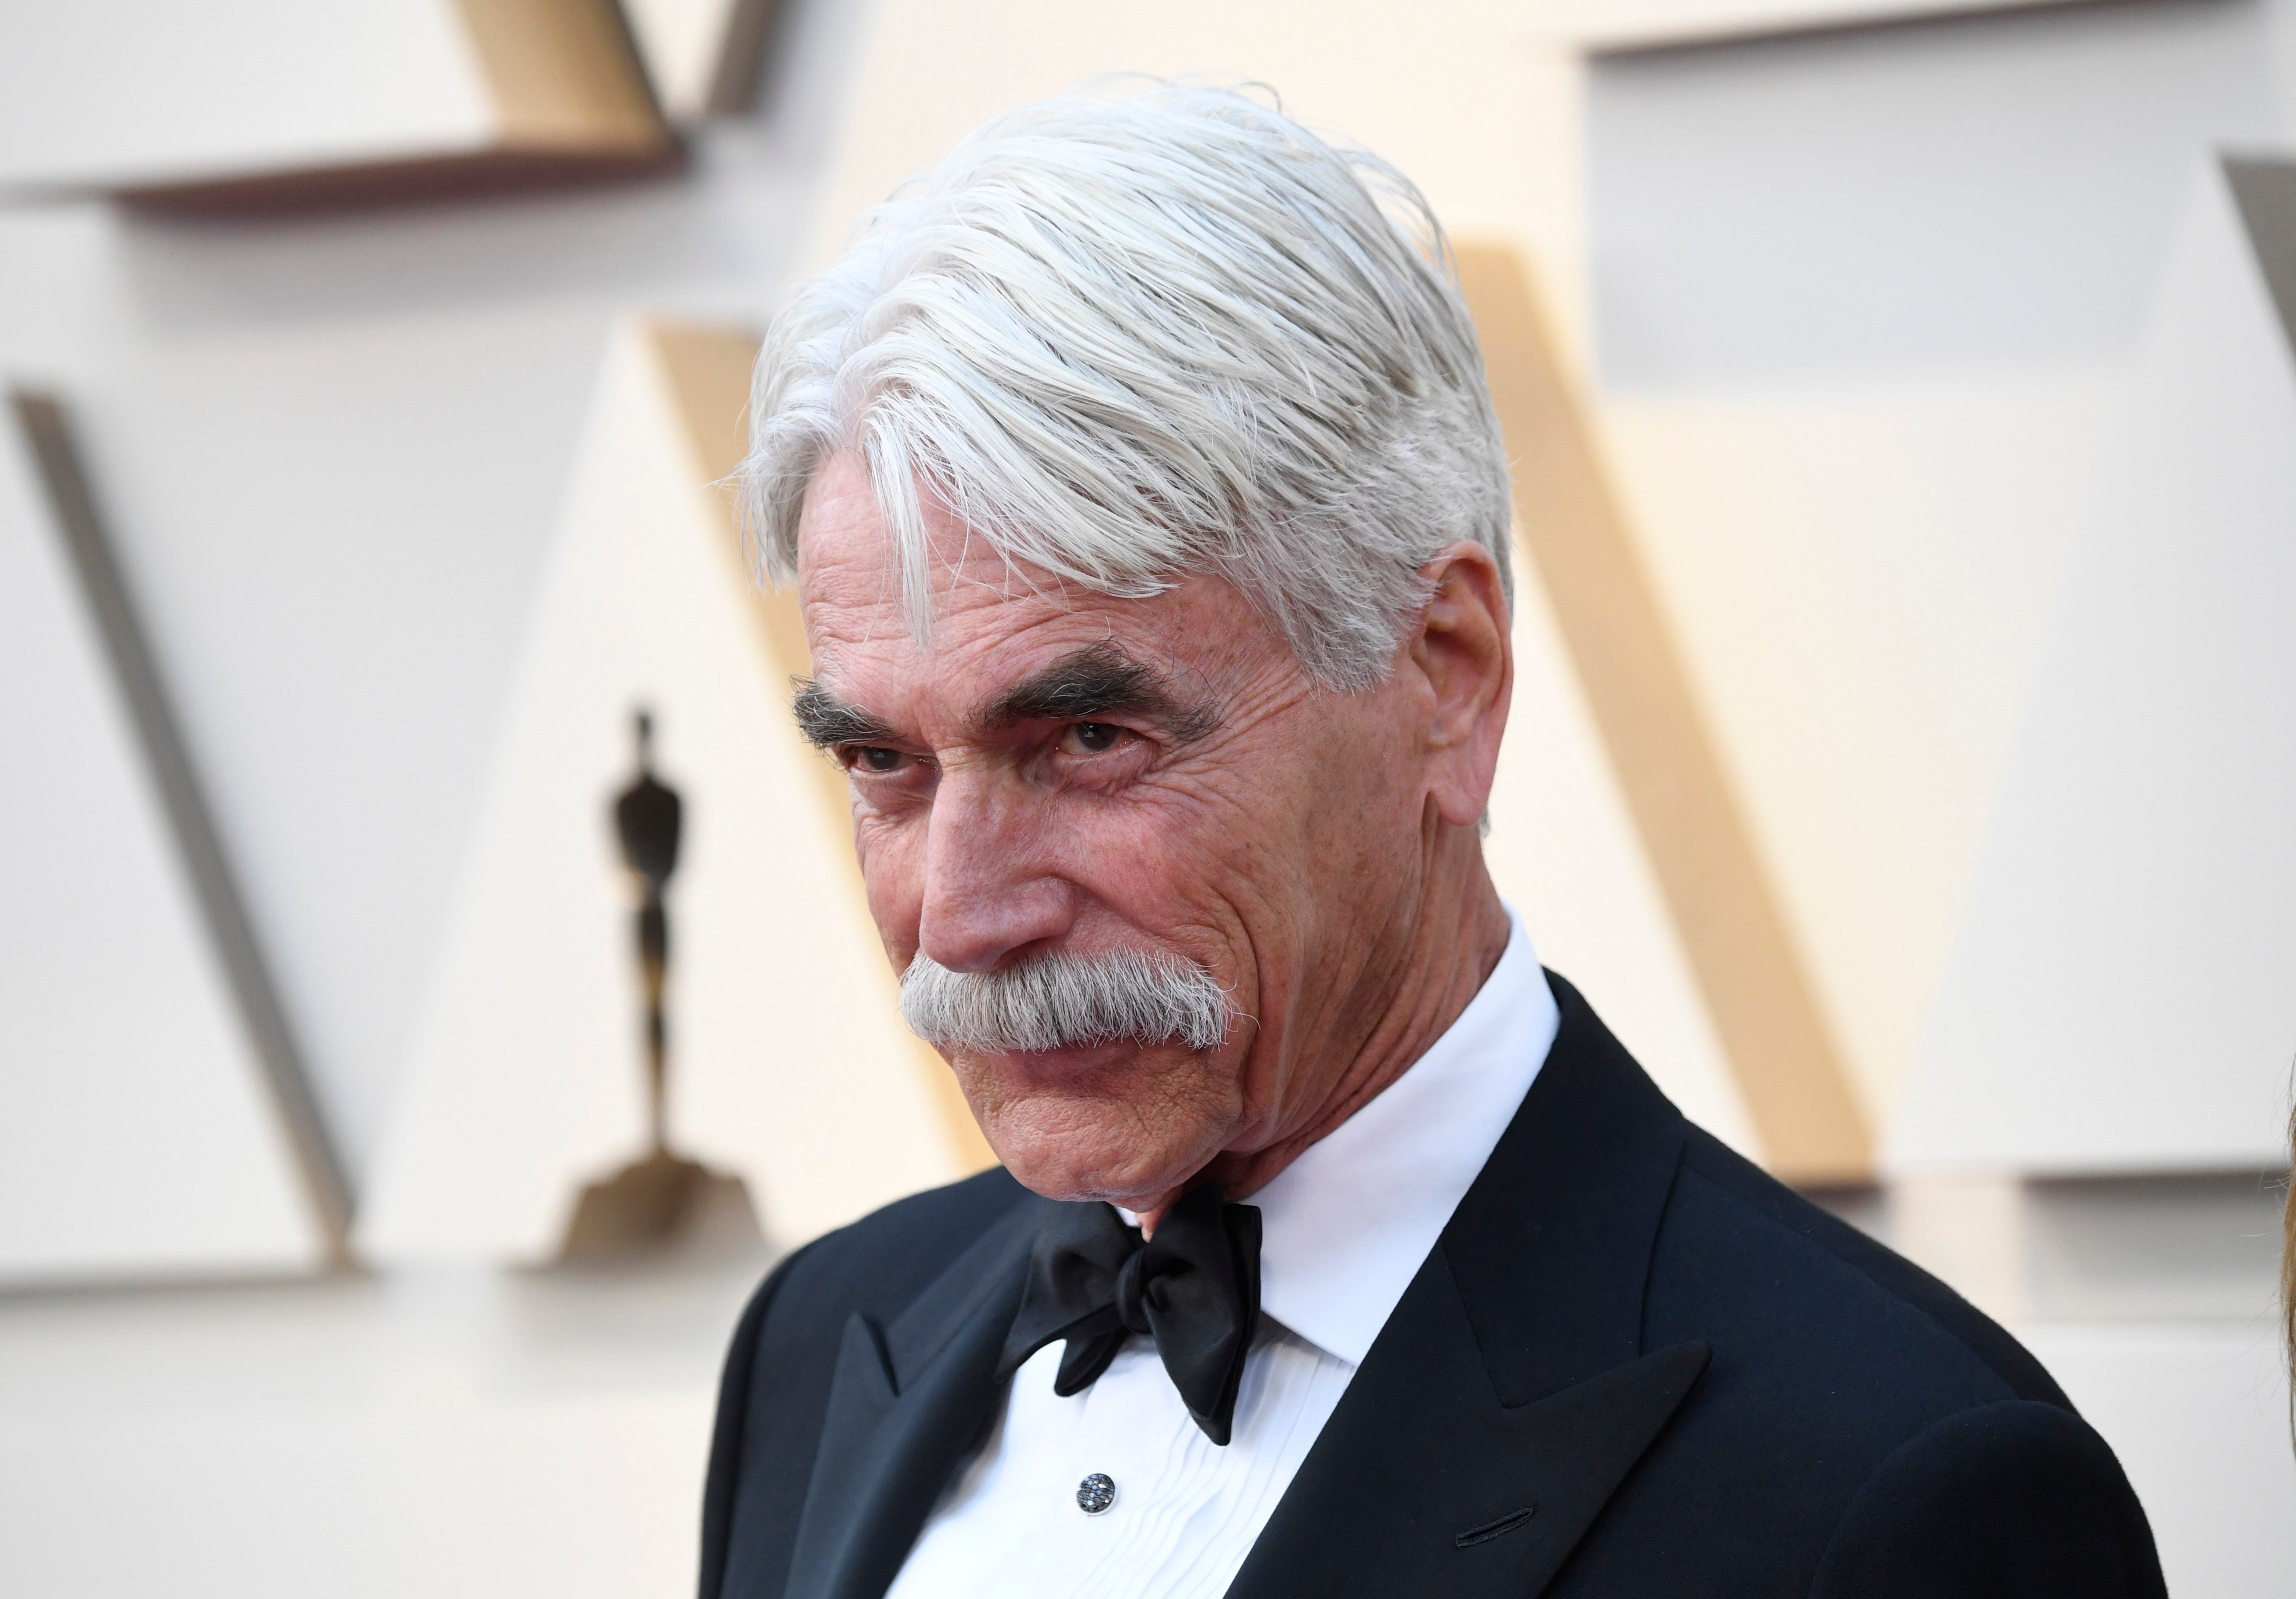 Sam Elliott Apologizes for ‘The Power of the Dog’ Comments: ‘The Gay Community Has Been Incredible to Me’